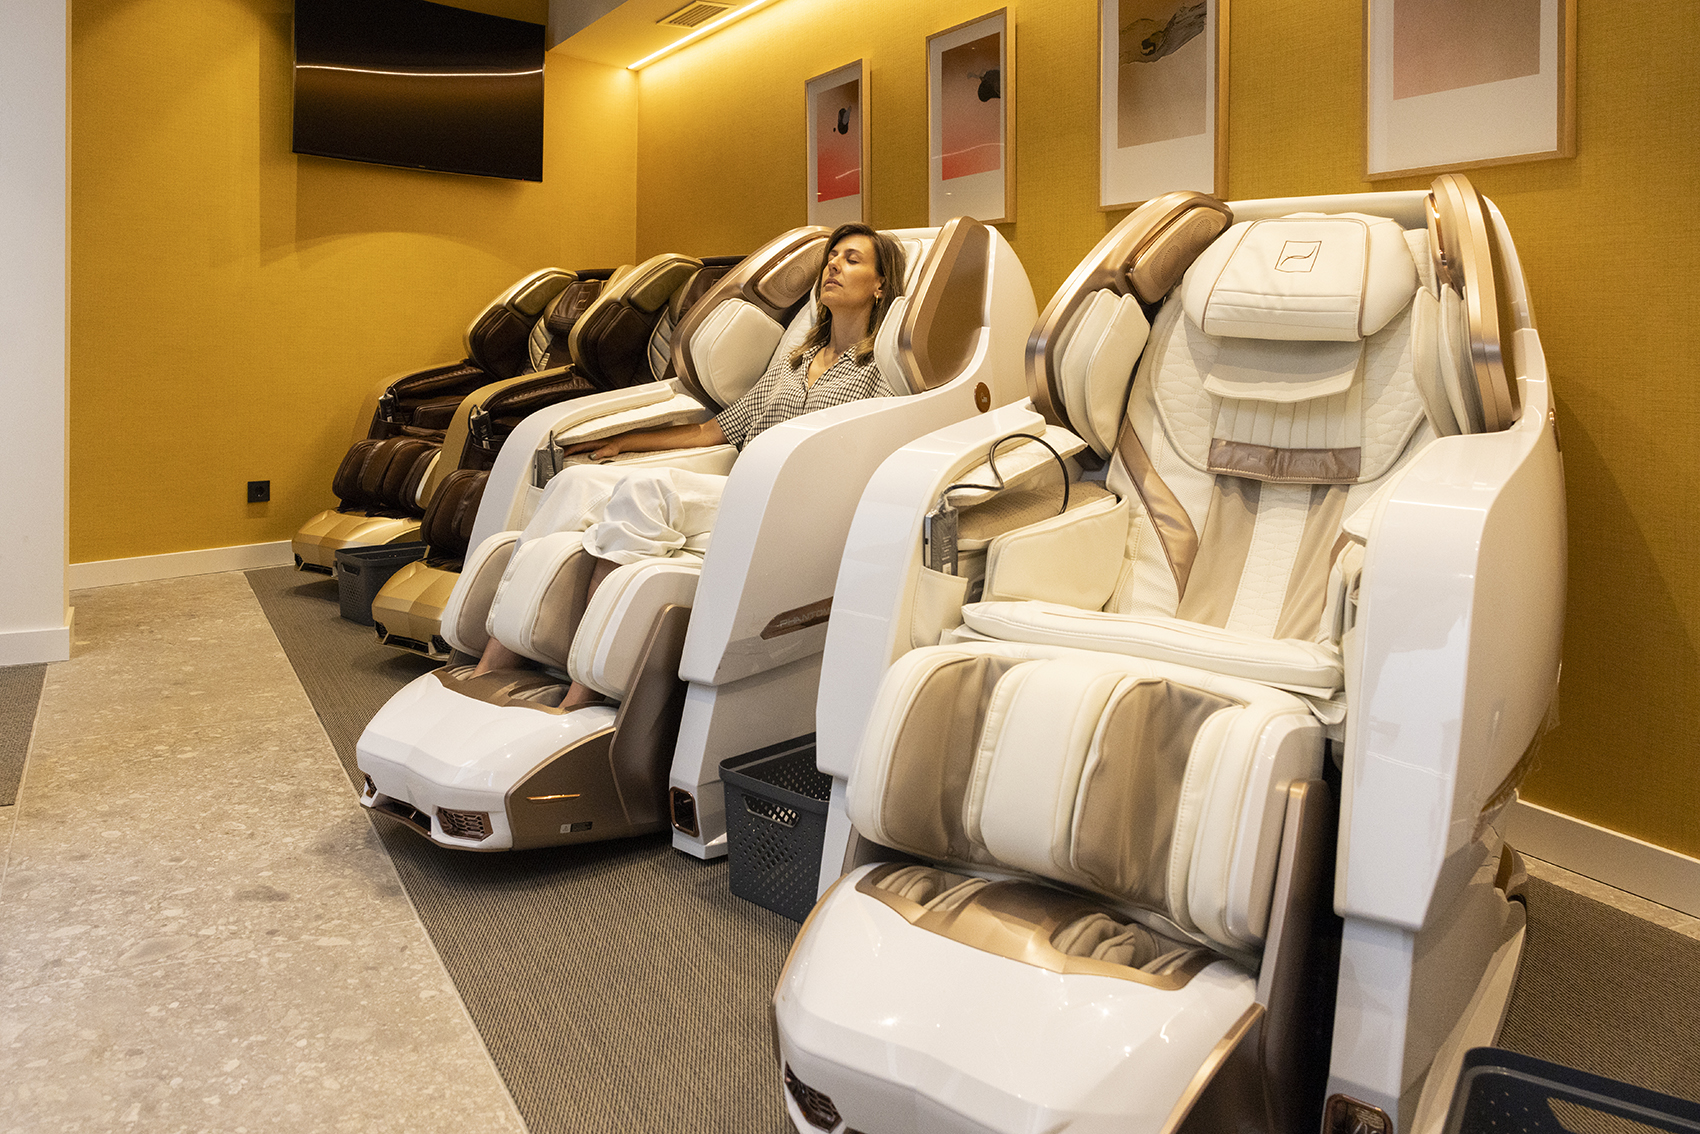 Massage and relaxation chairs